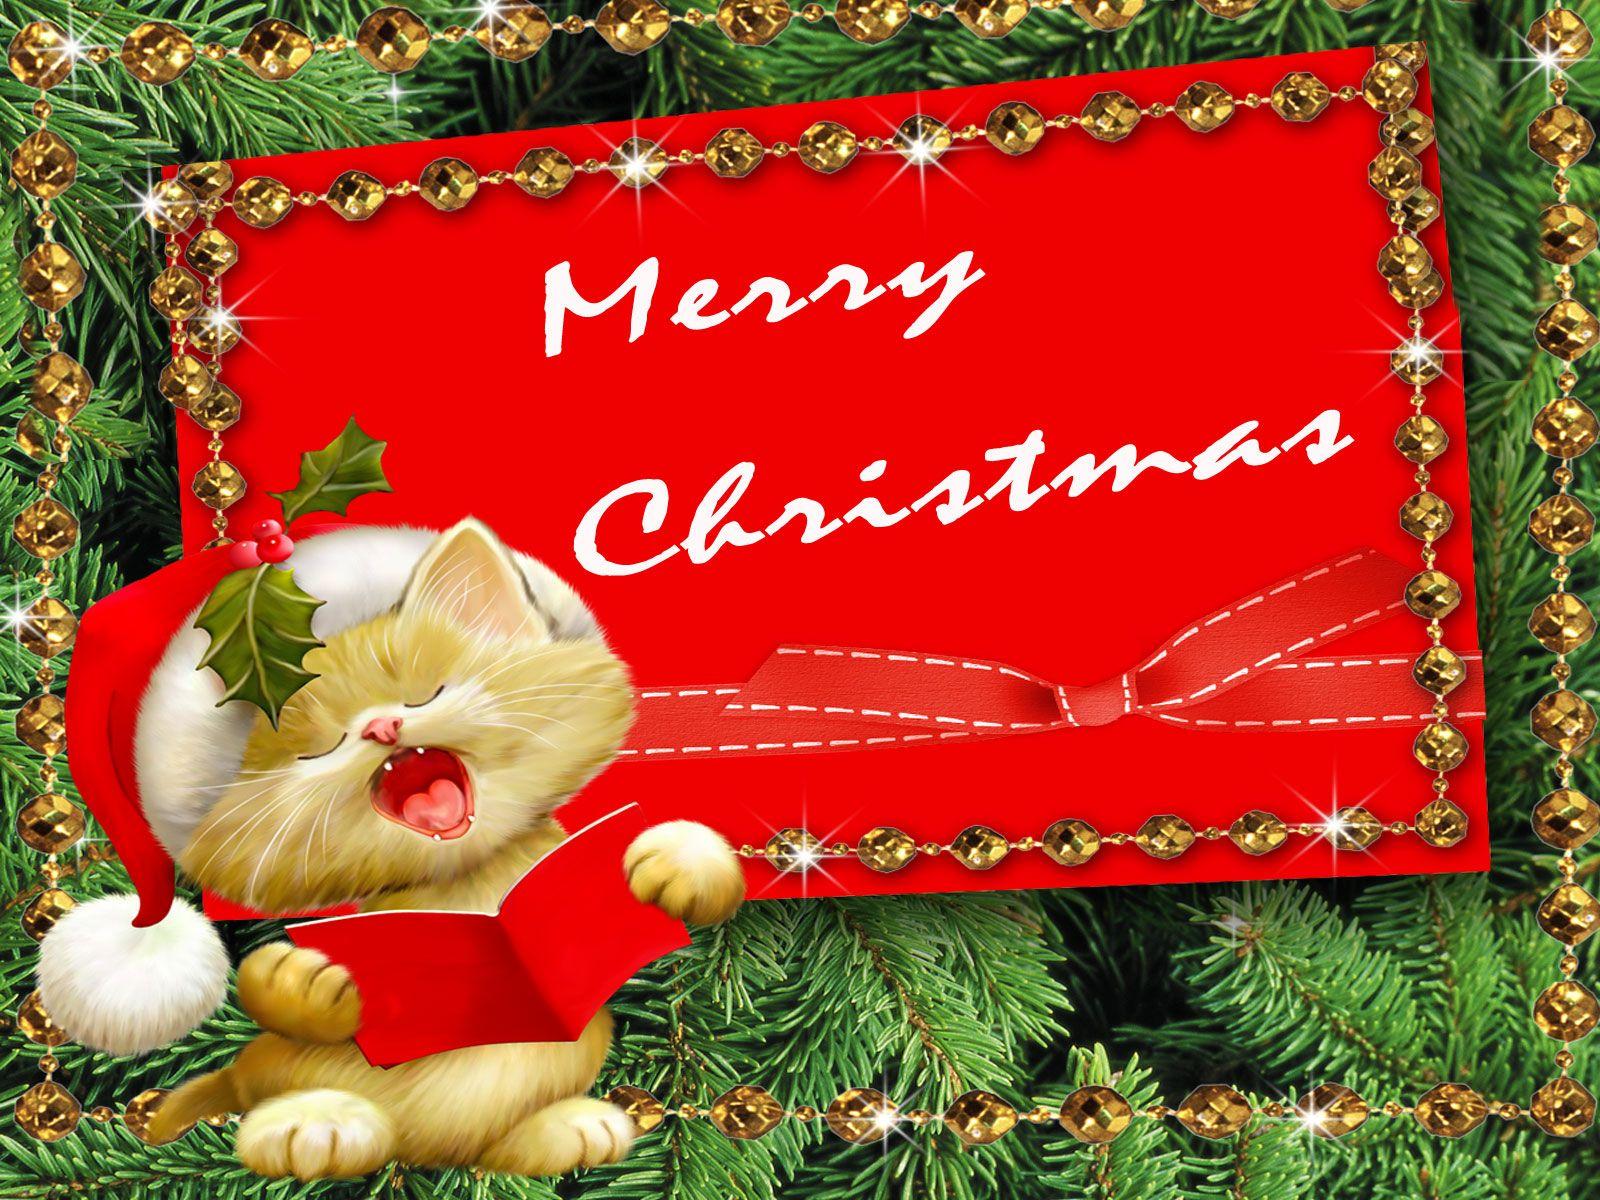 Free Merry Christmas Wallpaper Download Fastival greetings, HD